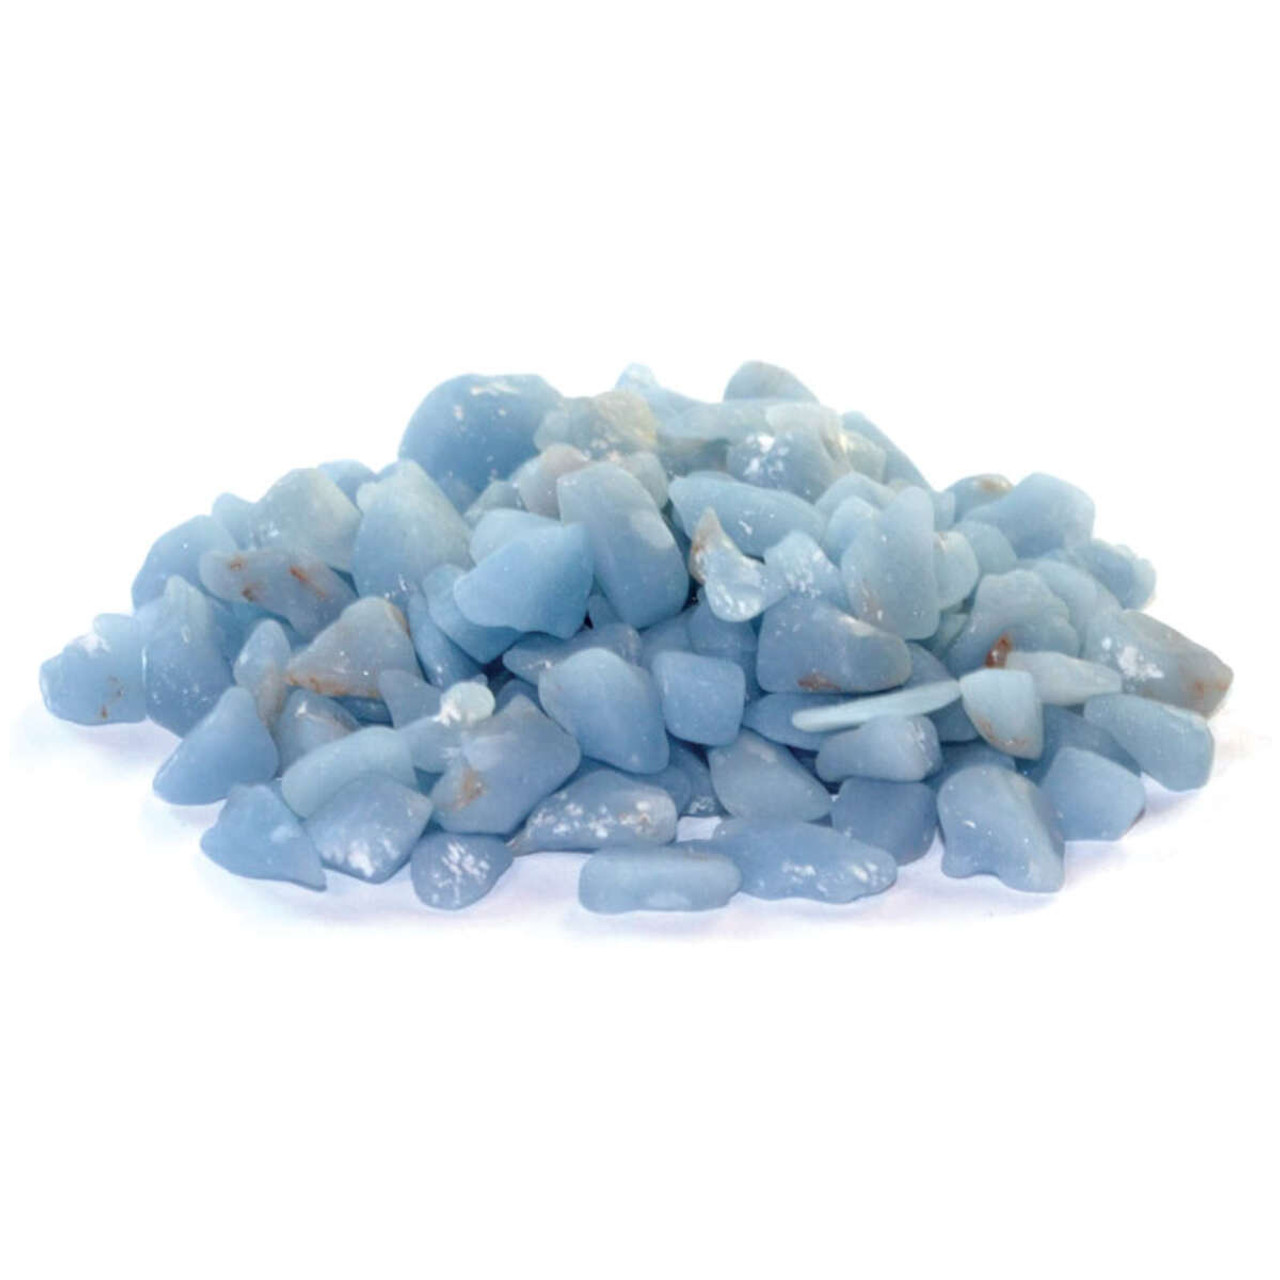 Angelite Tumbled Chips 5-7mm 1 lb.